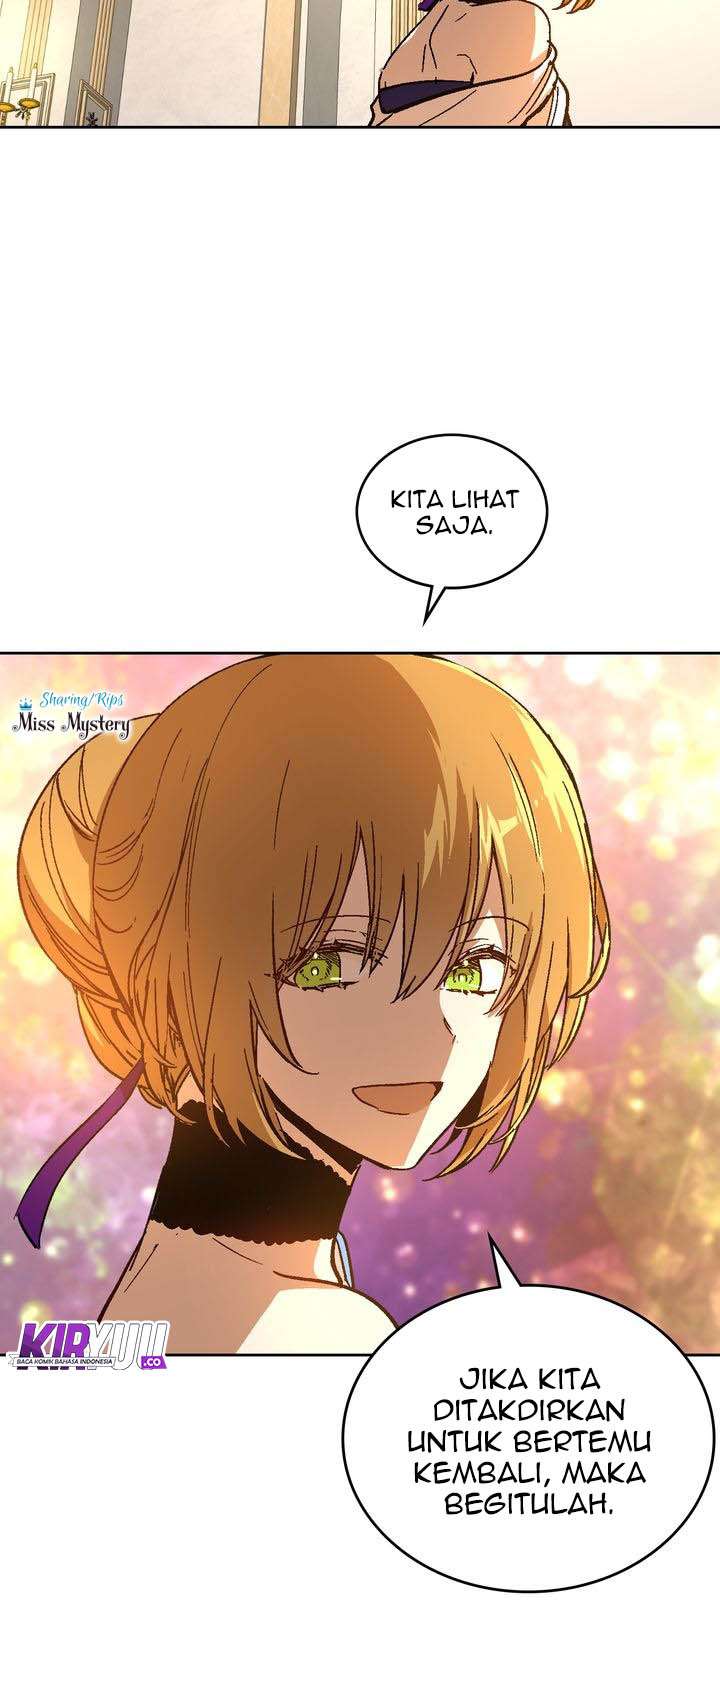 The Reason Why Raeliana Ended Up at the Duke’s Mansion Chapter 59 Bahasa Indonesia